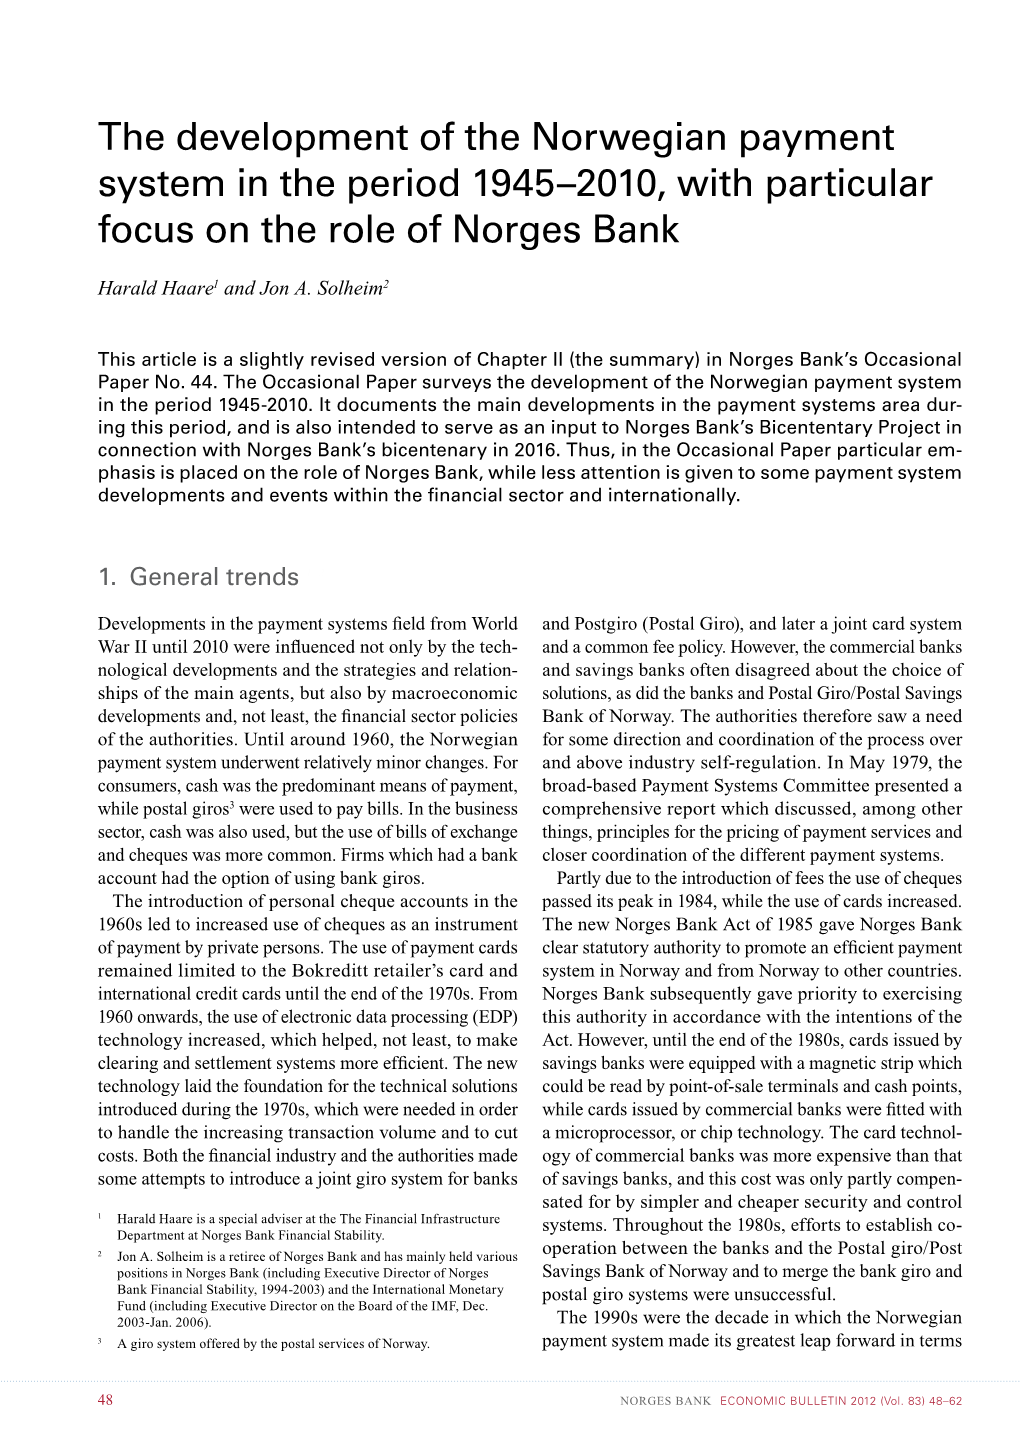 The Development of the Norwegian Payment System in the Period 1945–2010, with Particular Focus on the Role of Norges Bank